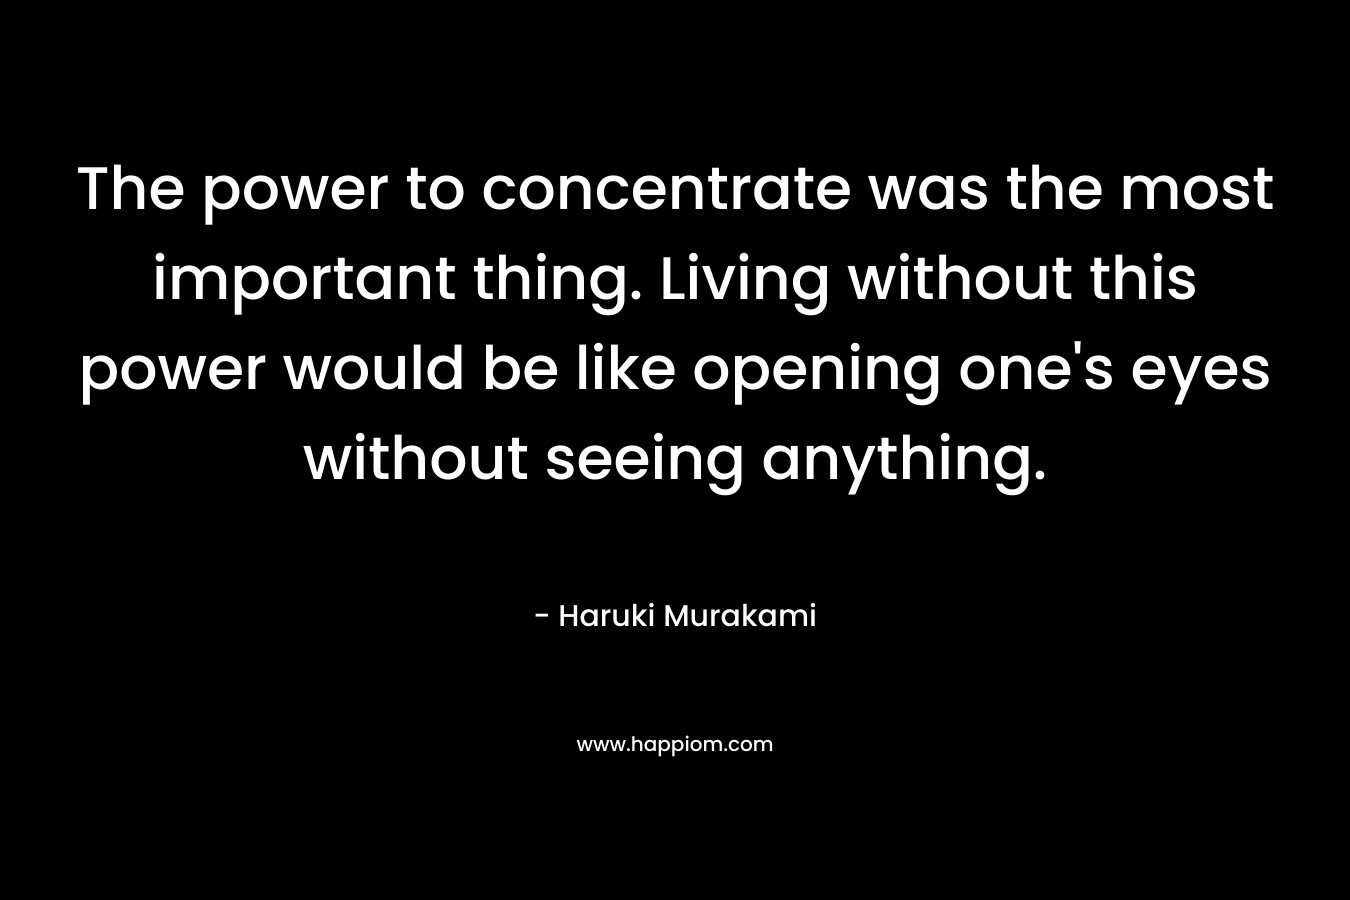 The power to concentrate was the most important thing. Living without this power would be like opening one’s eyes without seeing anything. – Haruki Murakami